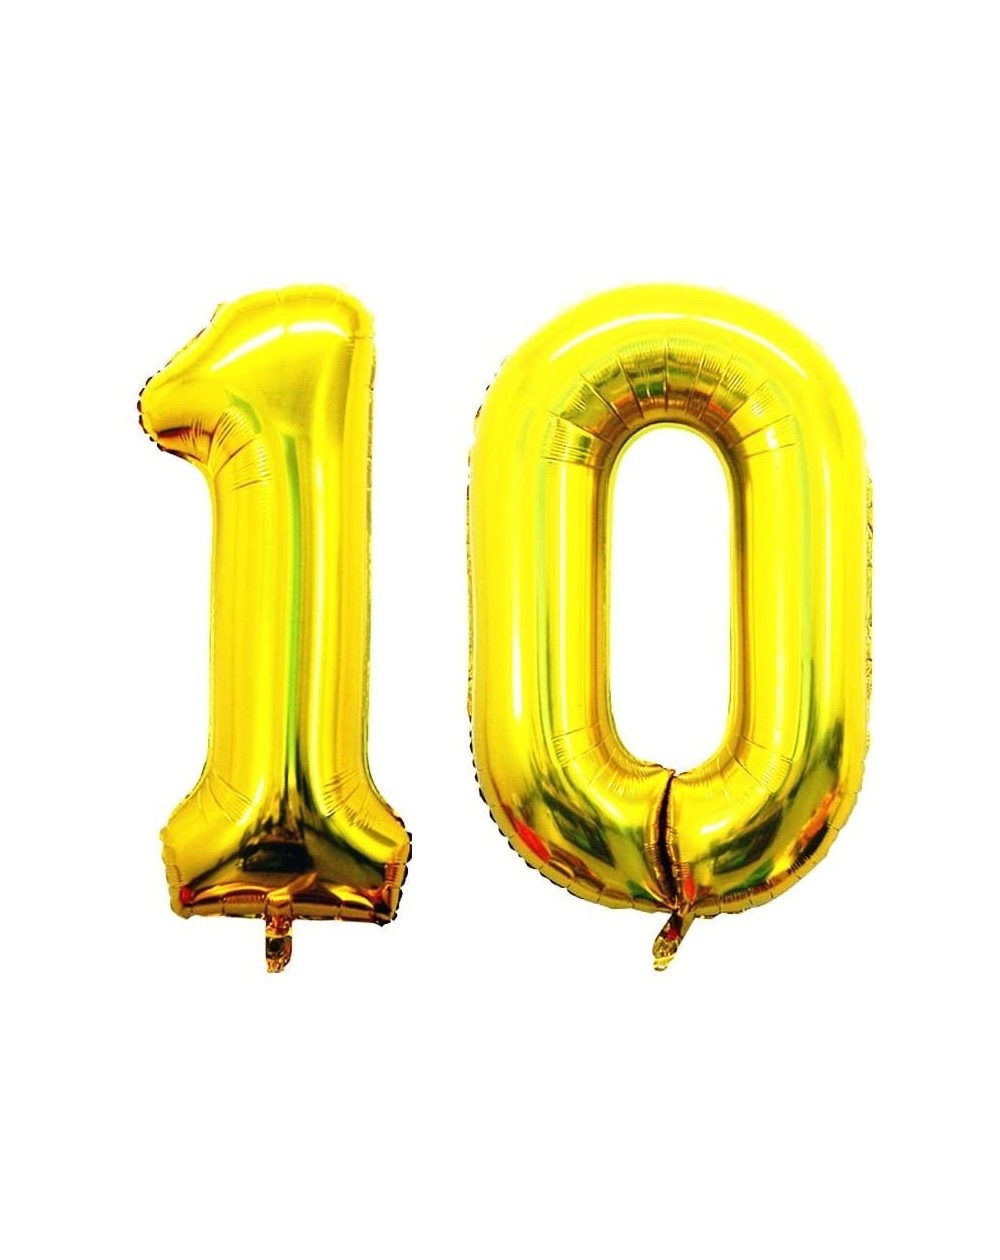 Balloons 42 Inch Gold Number 10 Balloon-Jumbo Foil Helium Balloons for 10th Birthday Party Decorations and 10th Anniversary E...